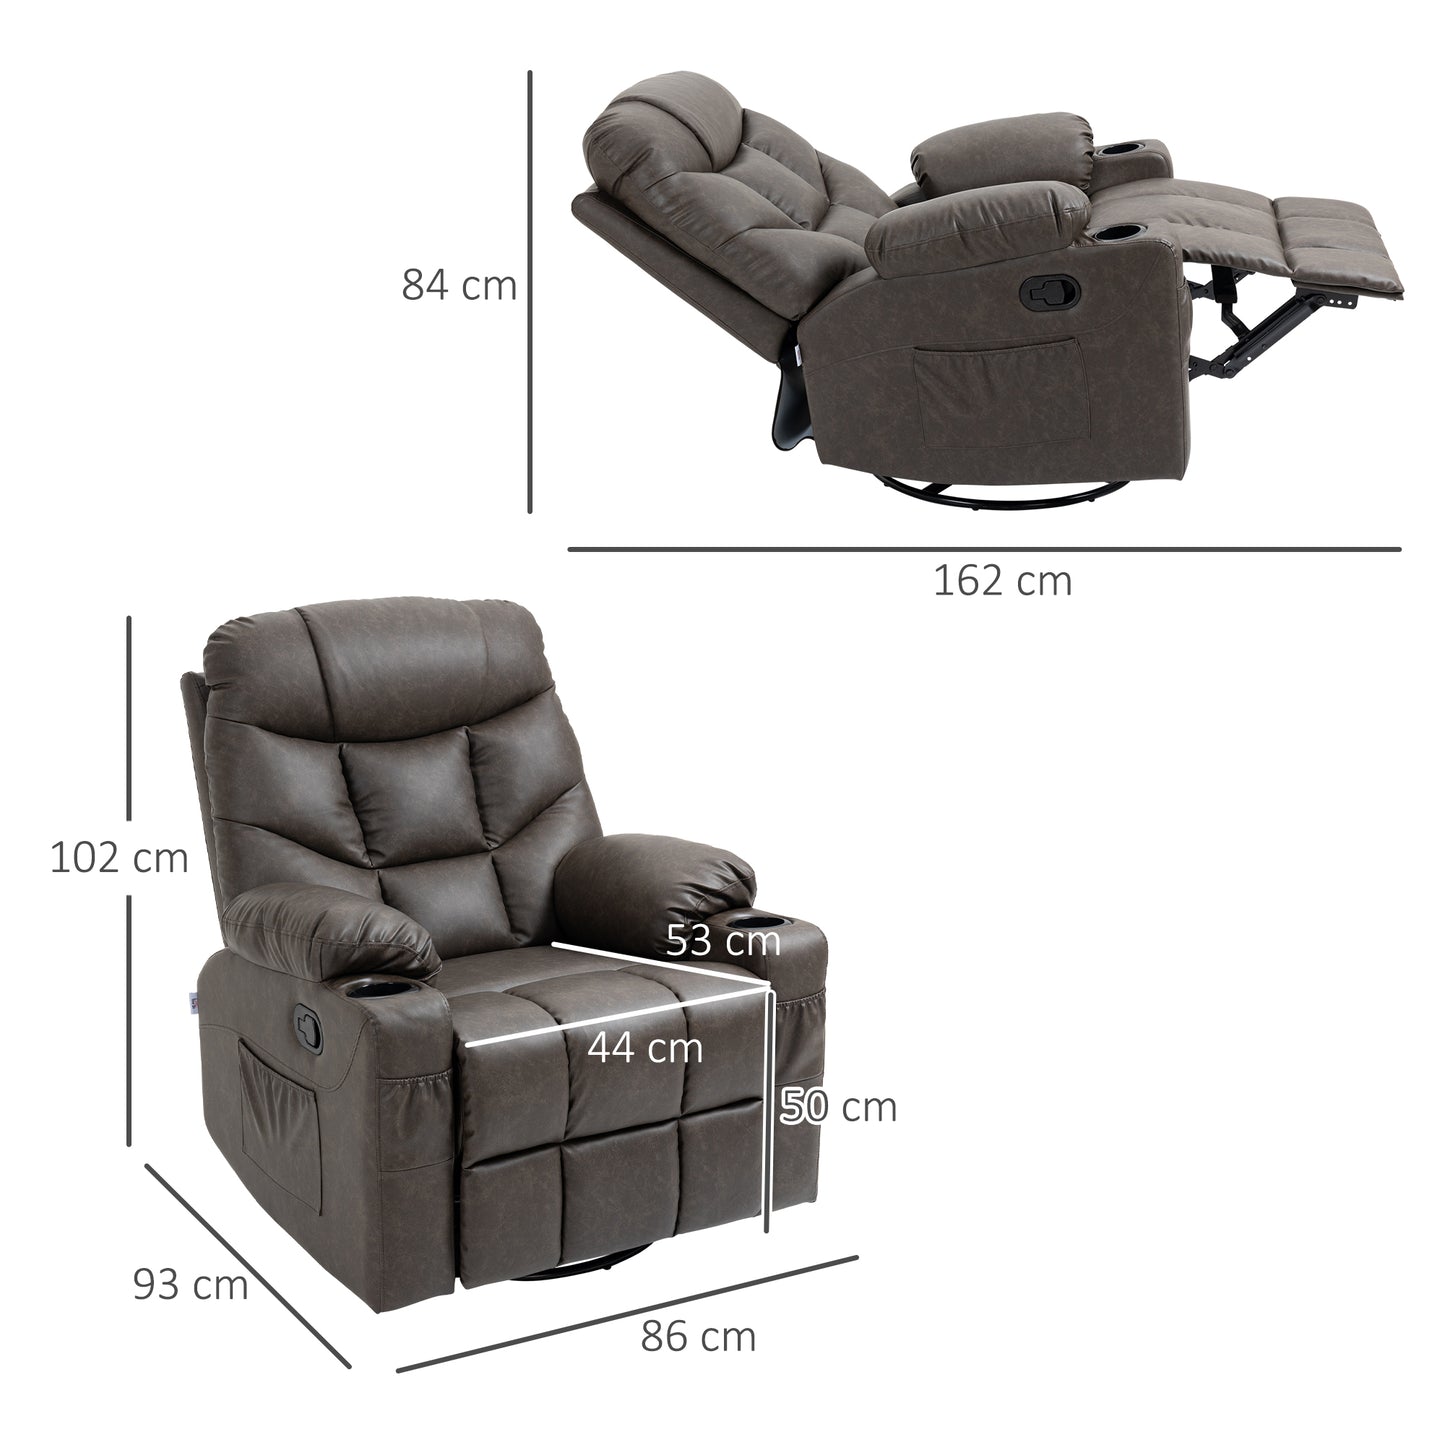 HOMCOM Manual Reclining Chair, Recliner Armchair with Faux Leather, Footrest, Cup Holders, 86x93x102cm, Brown